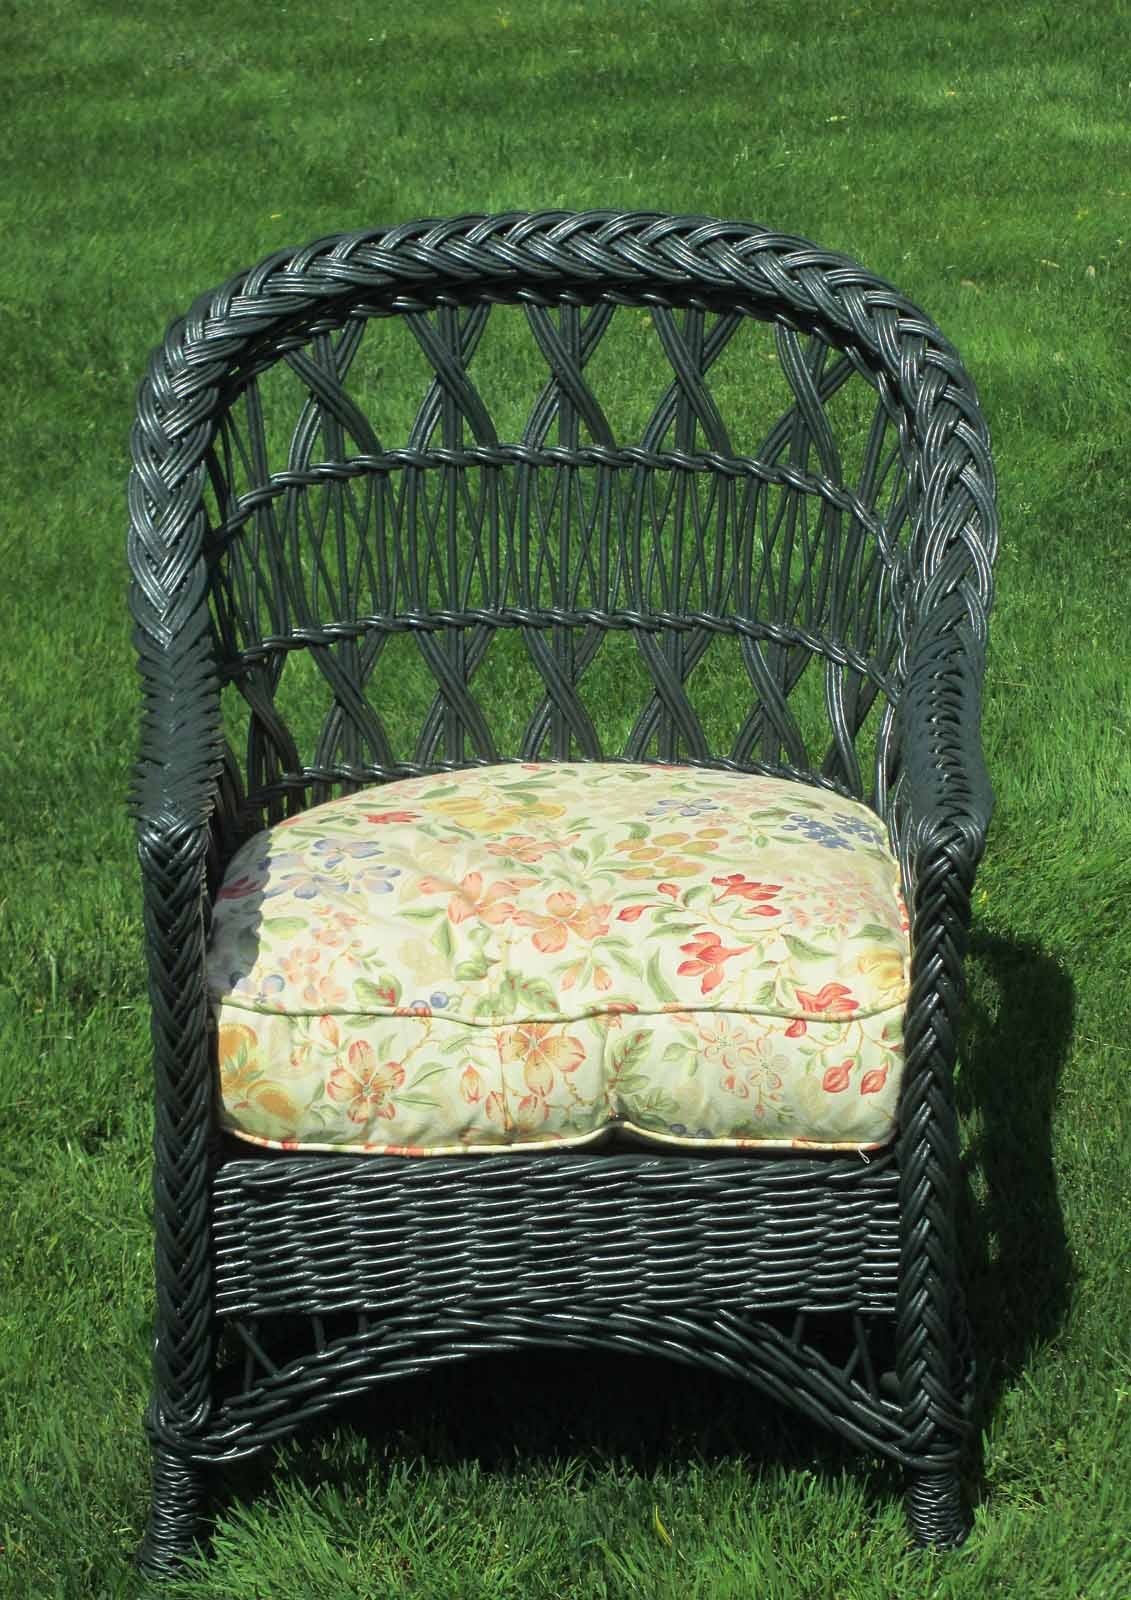 Bar Harbor wicker armchair in dark green painted finish. Classic rounded back with triple-X design, also known as Cape May style. Woven seat platform with newer plush cushion. Pineapple twist-wrapped front feet.